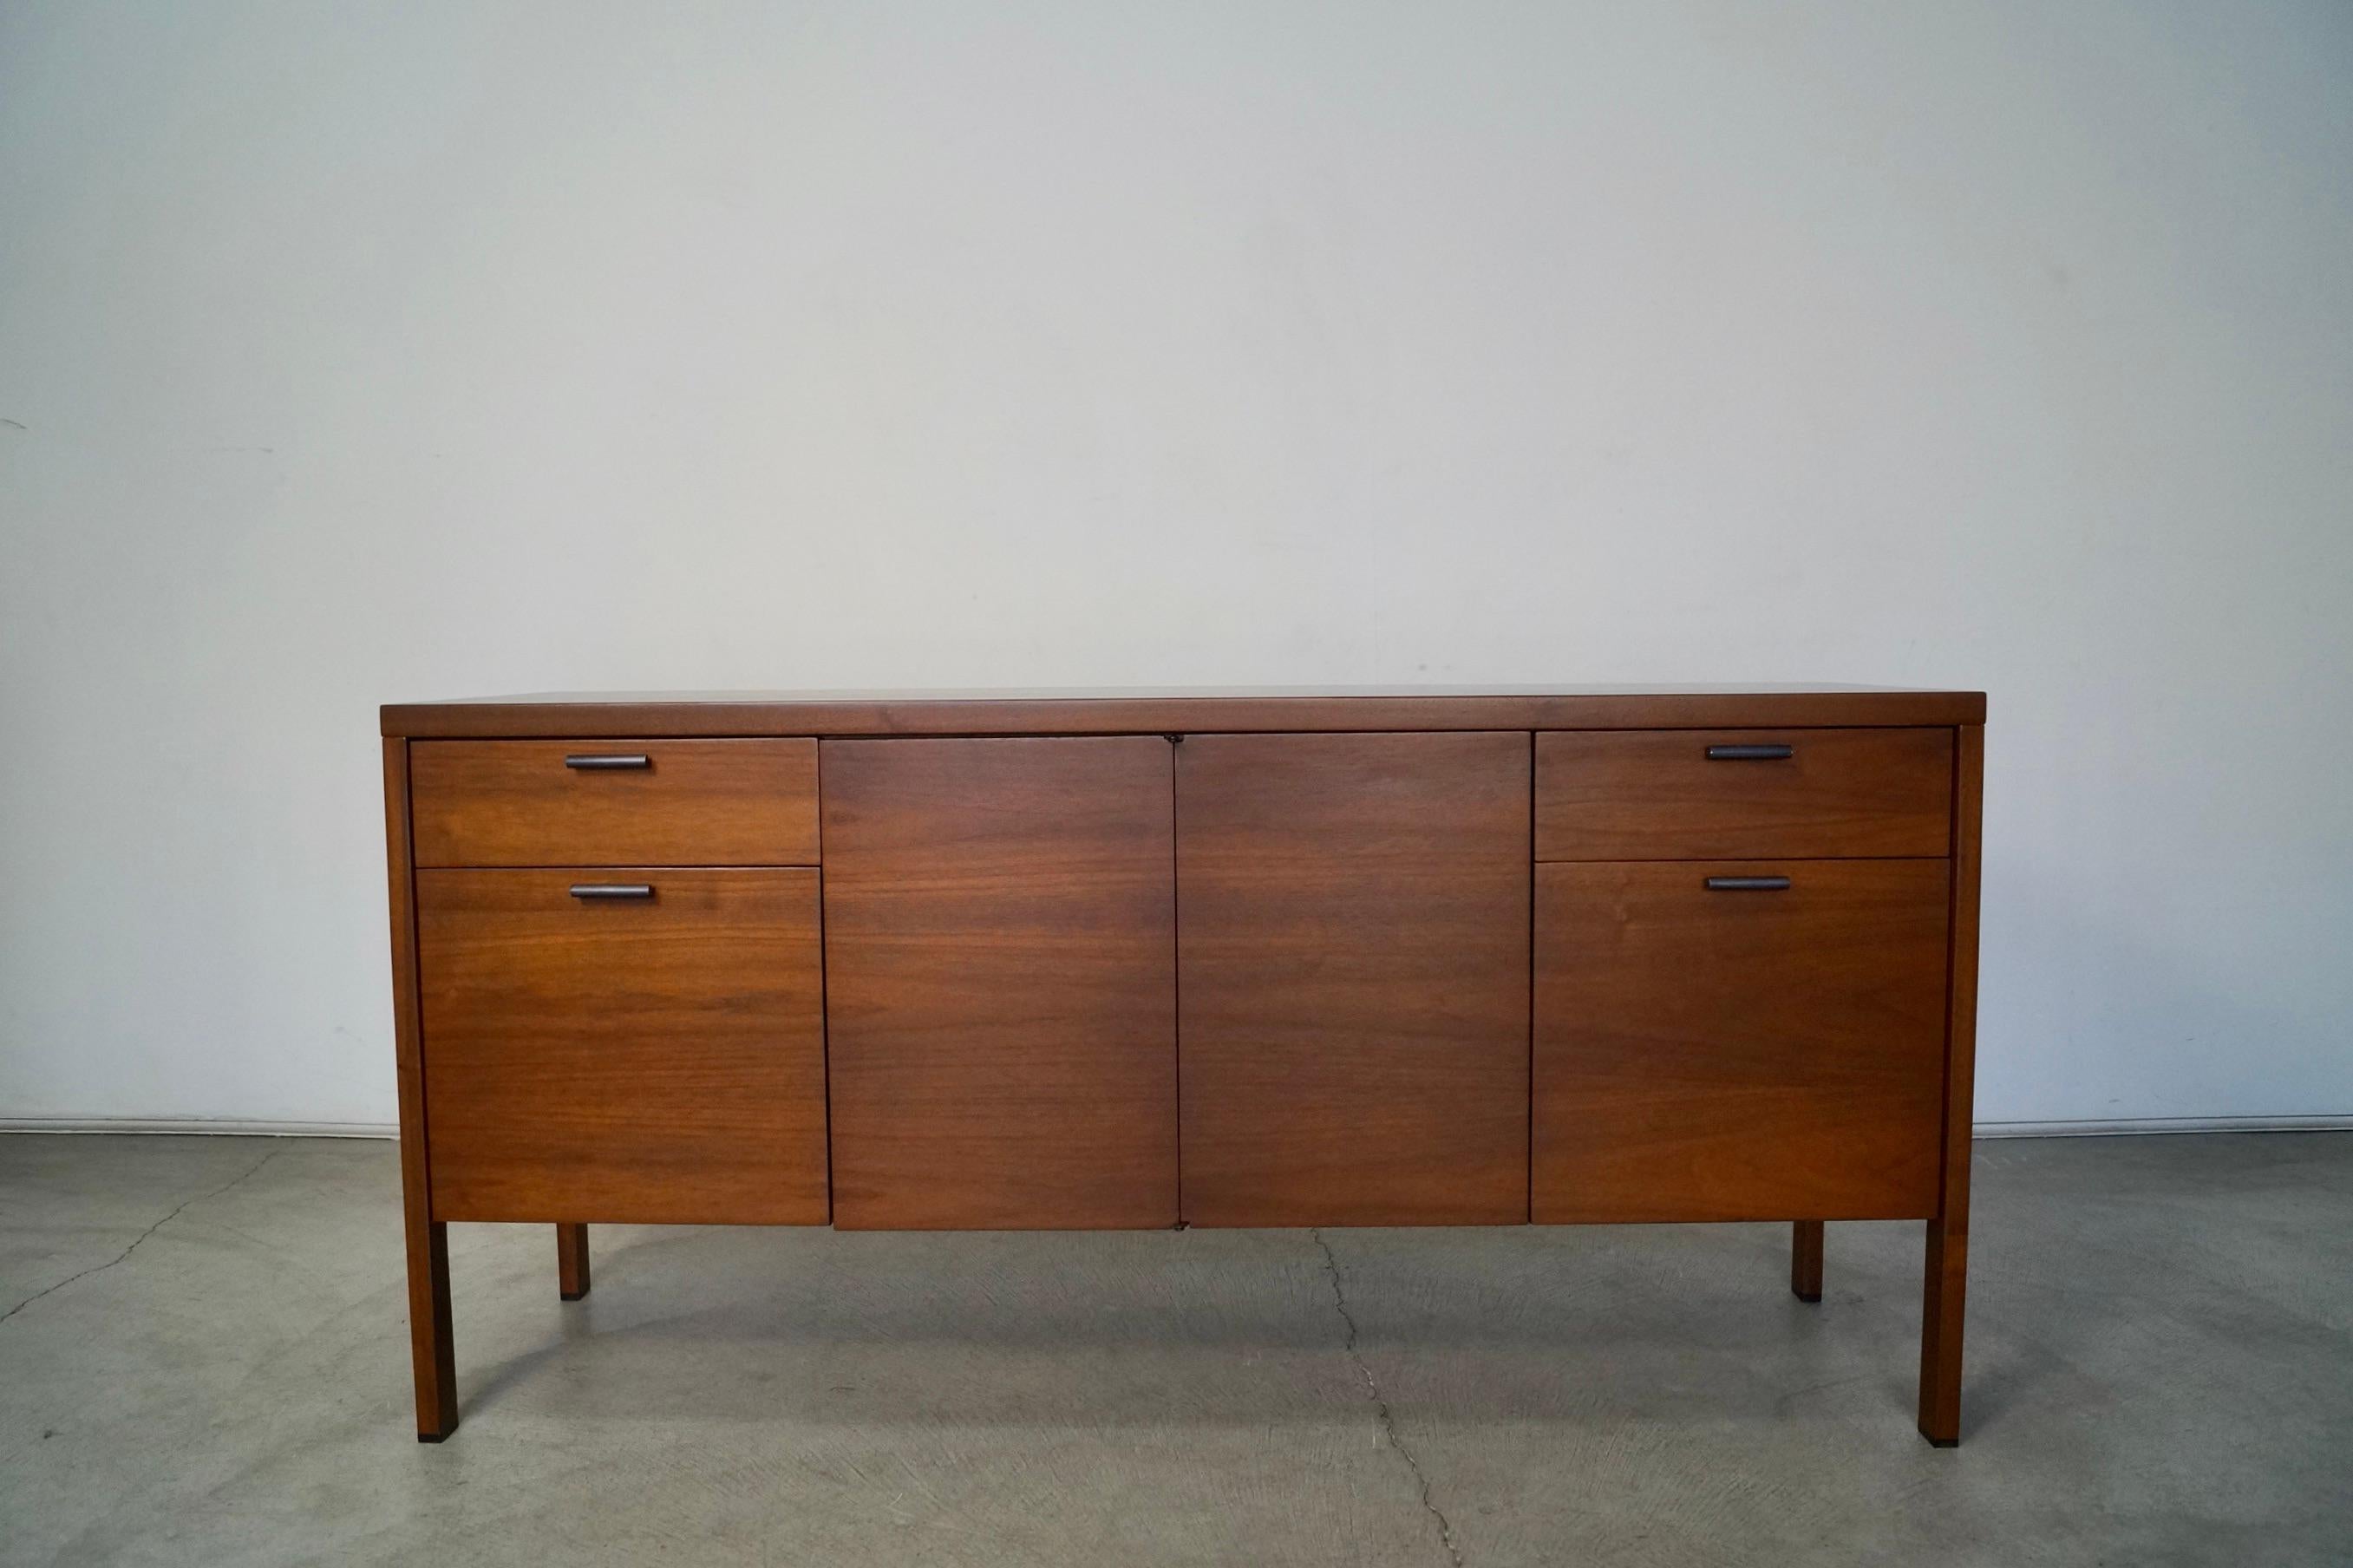 Vintage 1960s Mid-Century Modern credenza for sale. Made of walnut, and has been professionally refinished. It has four drawers, and a bi-folding door that opens up to a shelf that is adjustable. It has the original black metal hardware with black